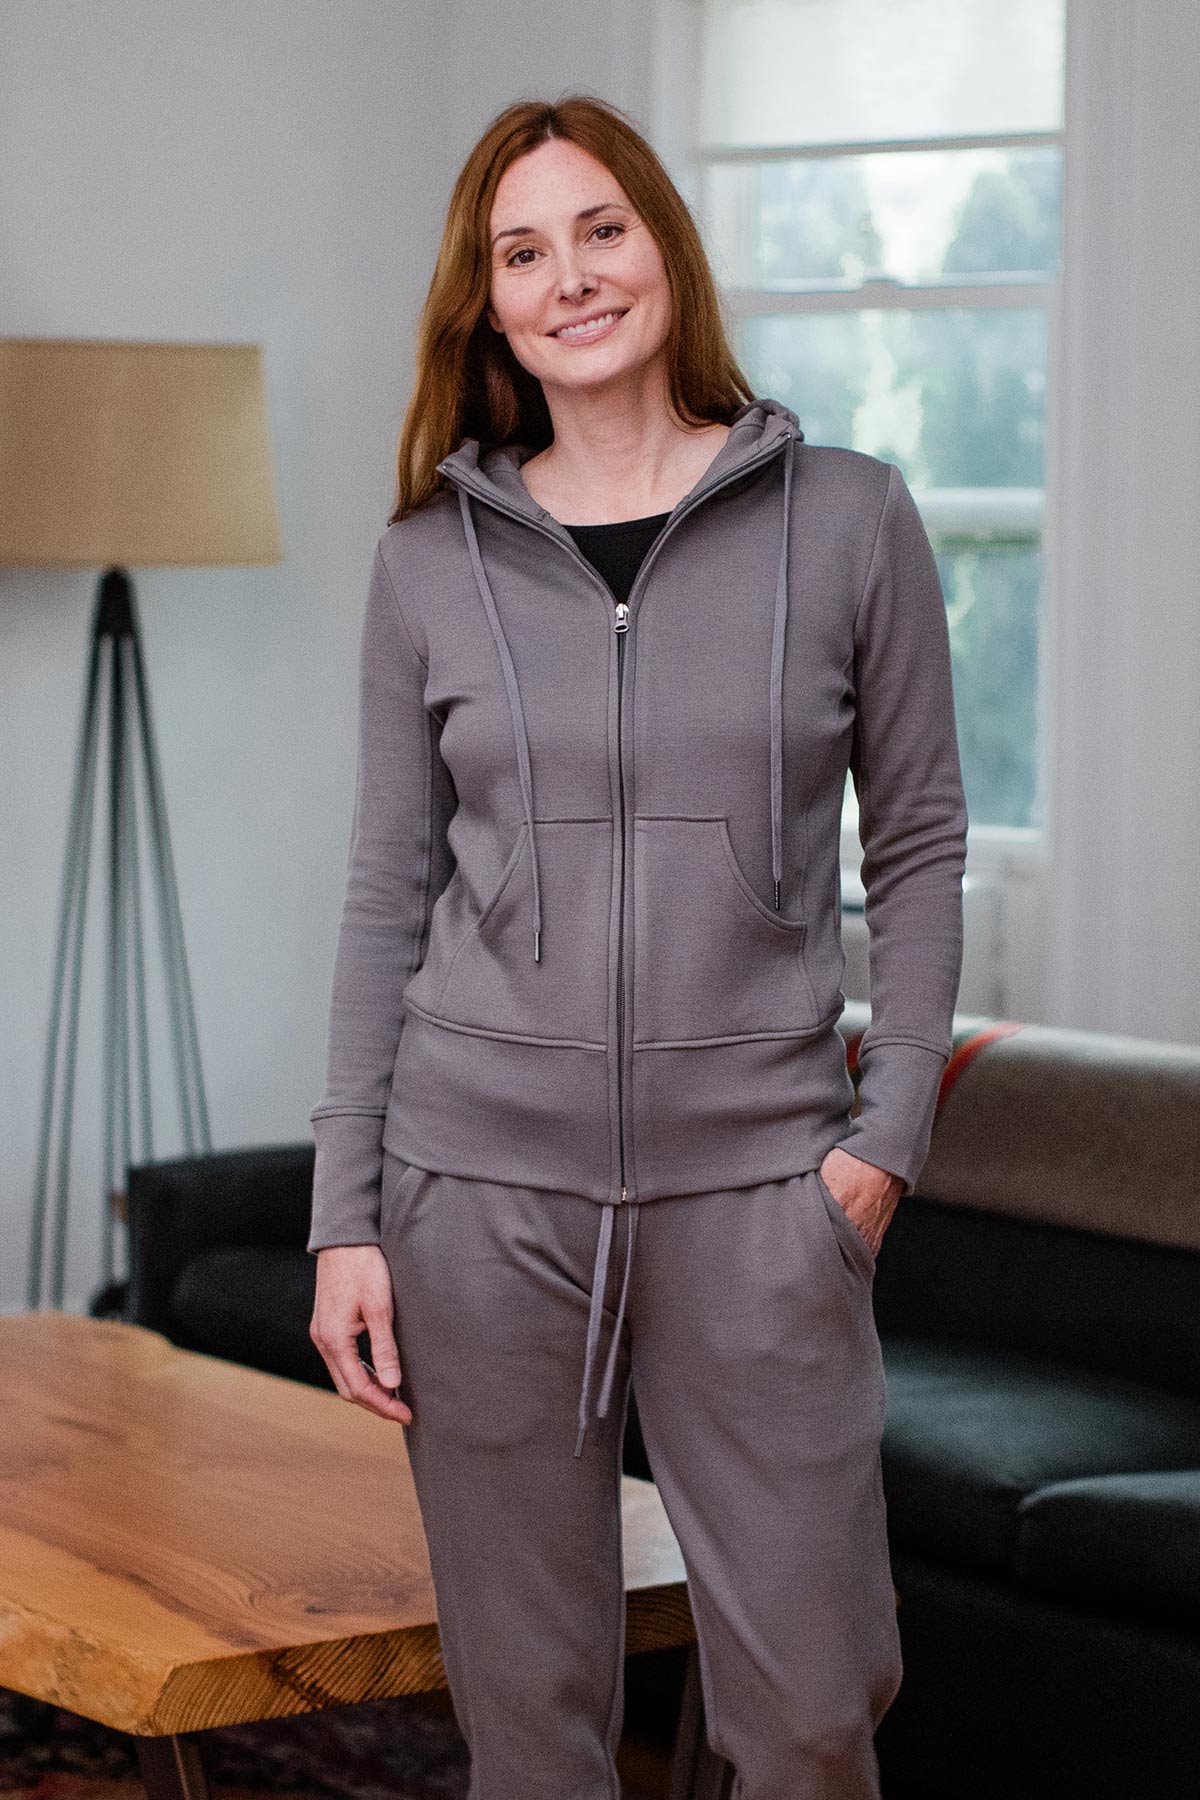 A woman standing and smiling with one hand in her pocket, wearing Yala Scarlet Zip-Up Bamboo and Organic Cotton Hooded Jacket Sweatshirt in Space Grey